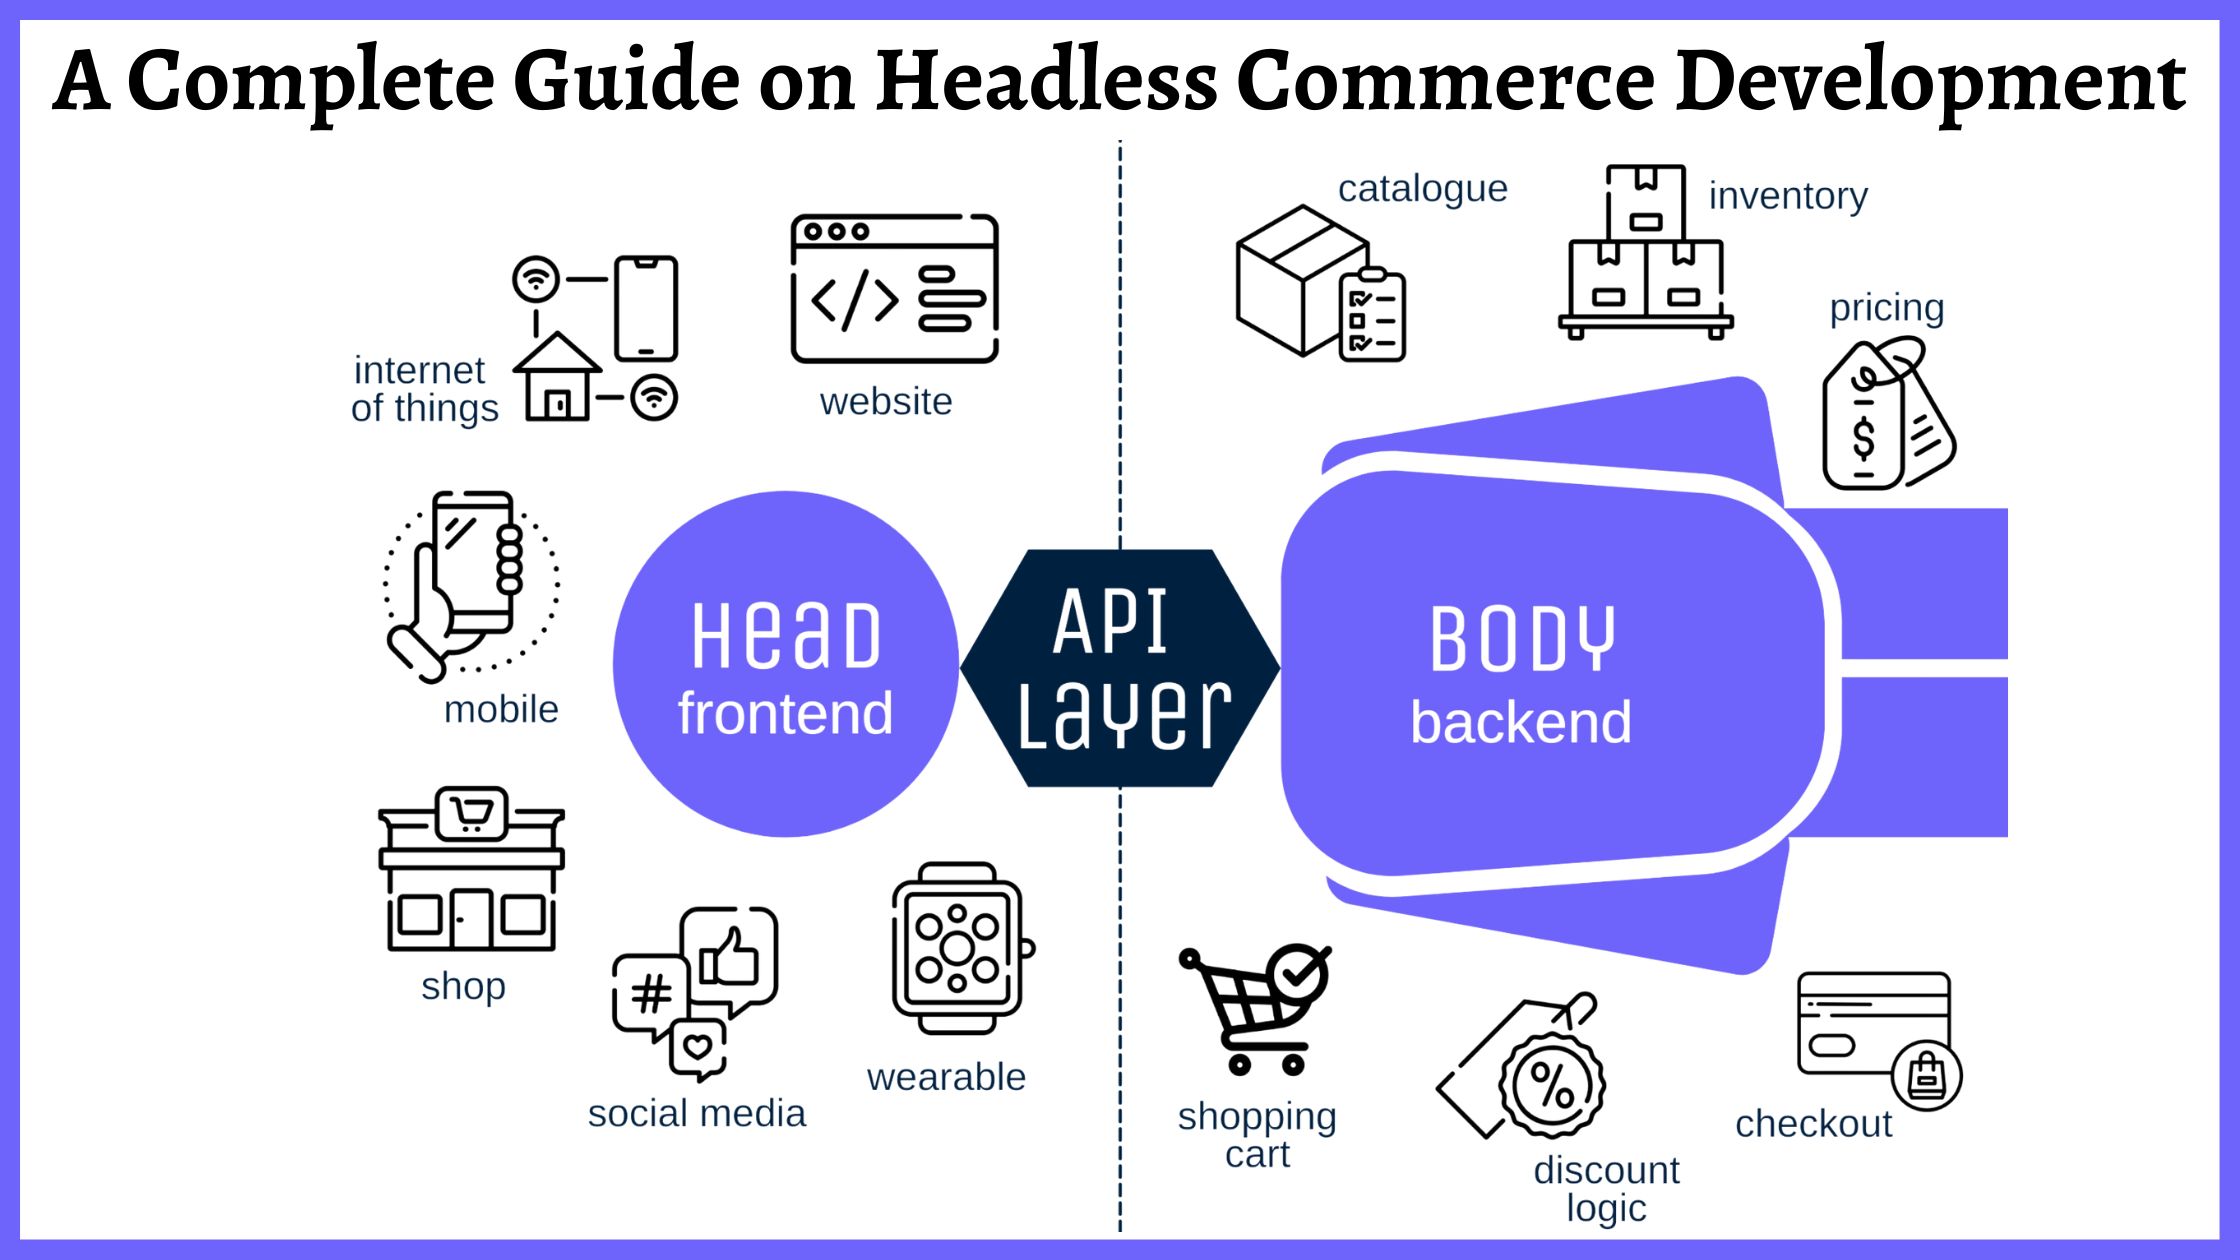 A Complete Guide on Headless Commerce Development